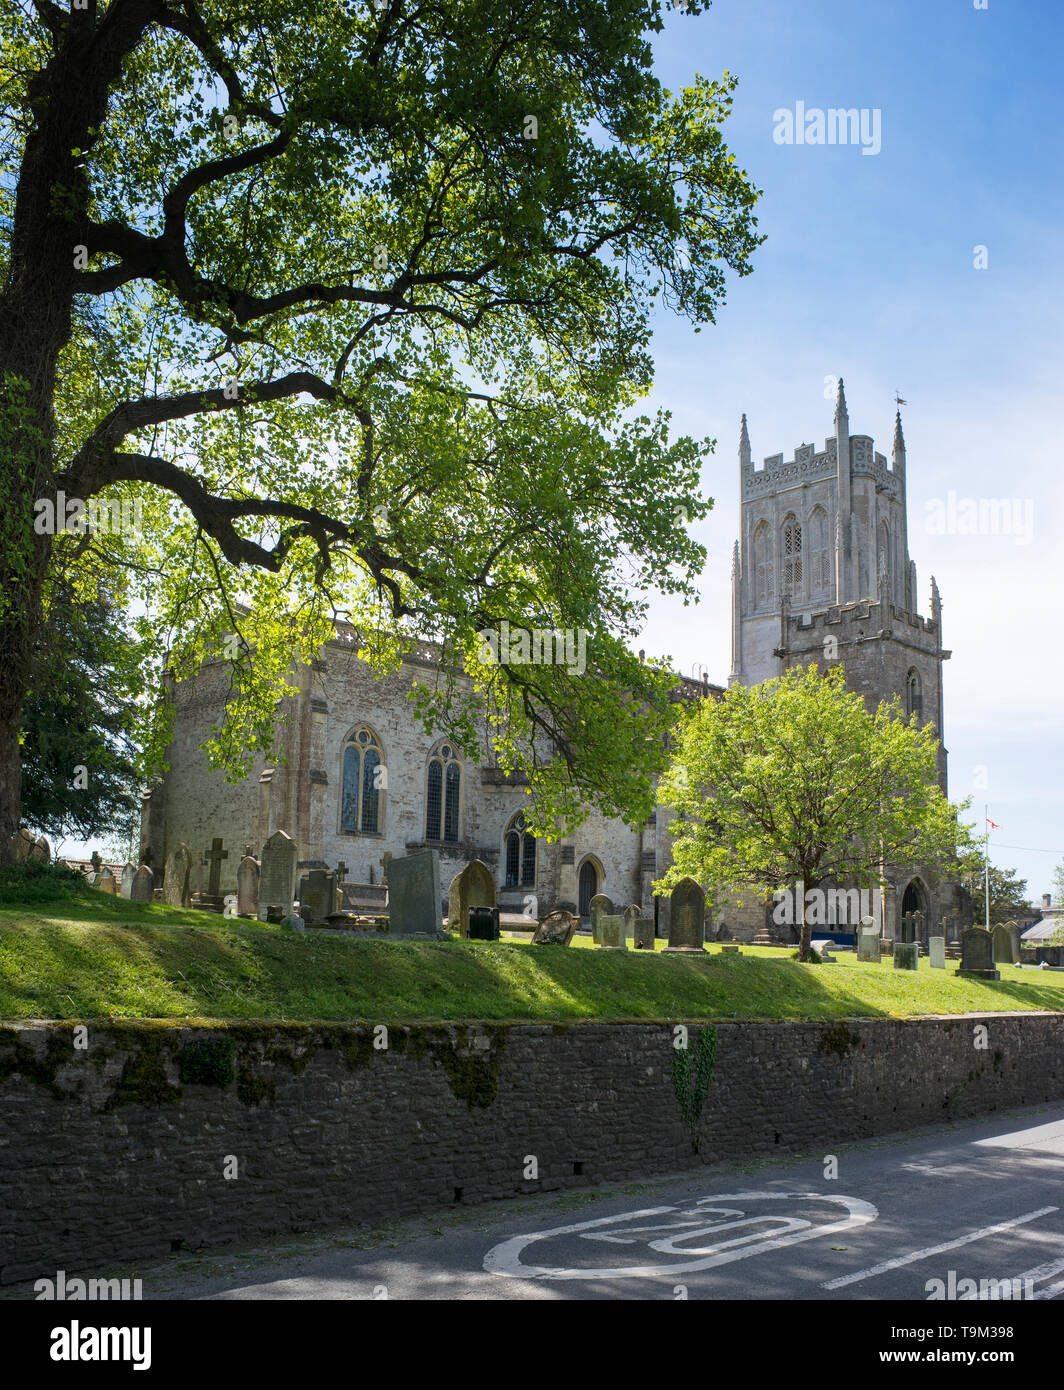 The Church of St Mary in Bruton, Somerset, England dates back to the 14th Century and is one of the celebrated Somerset Towers. Stock Photo